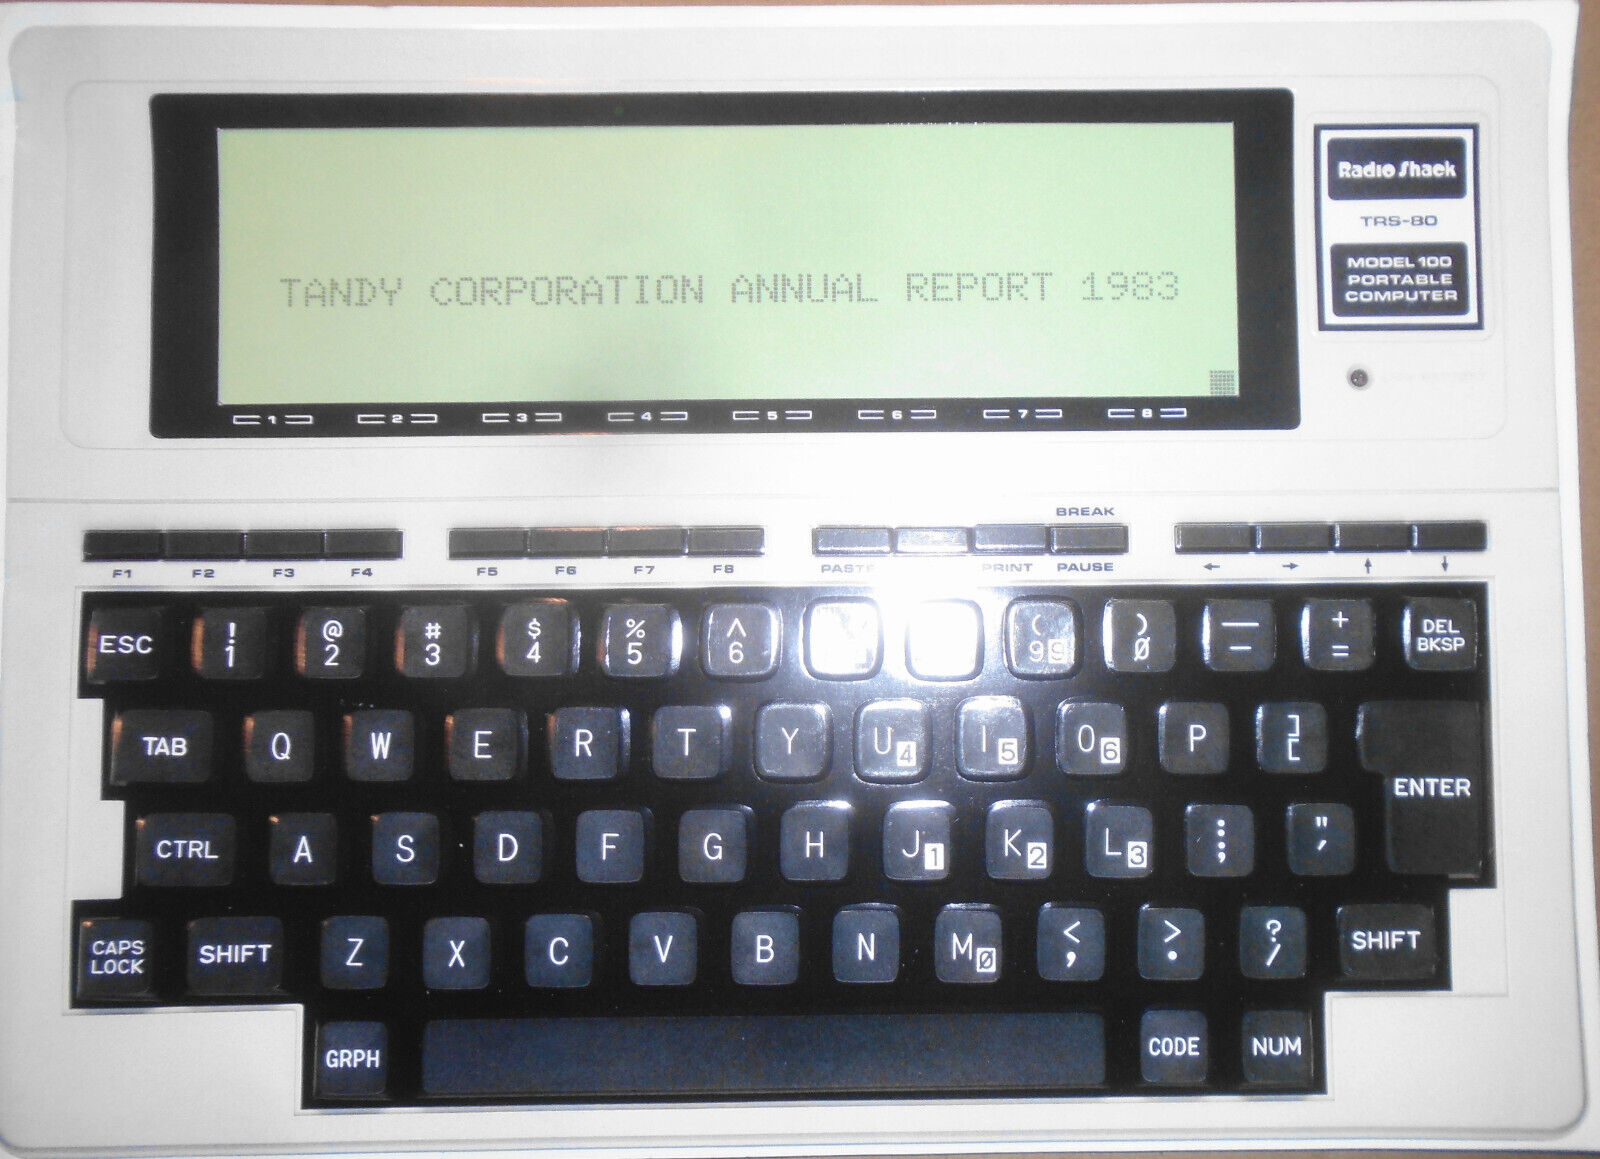 [Radio Shack] Tandy Corporation Annual Report 1983 with embossed Model 100 cover